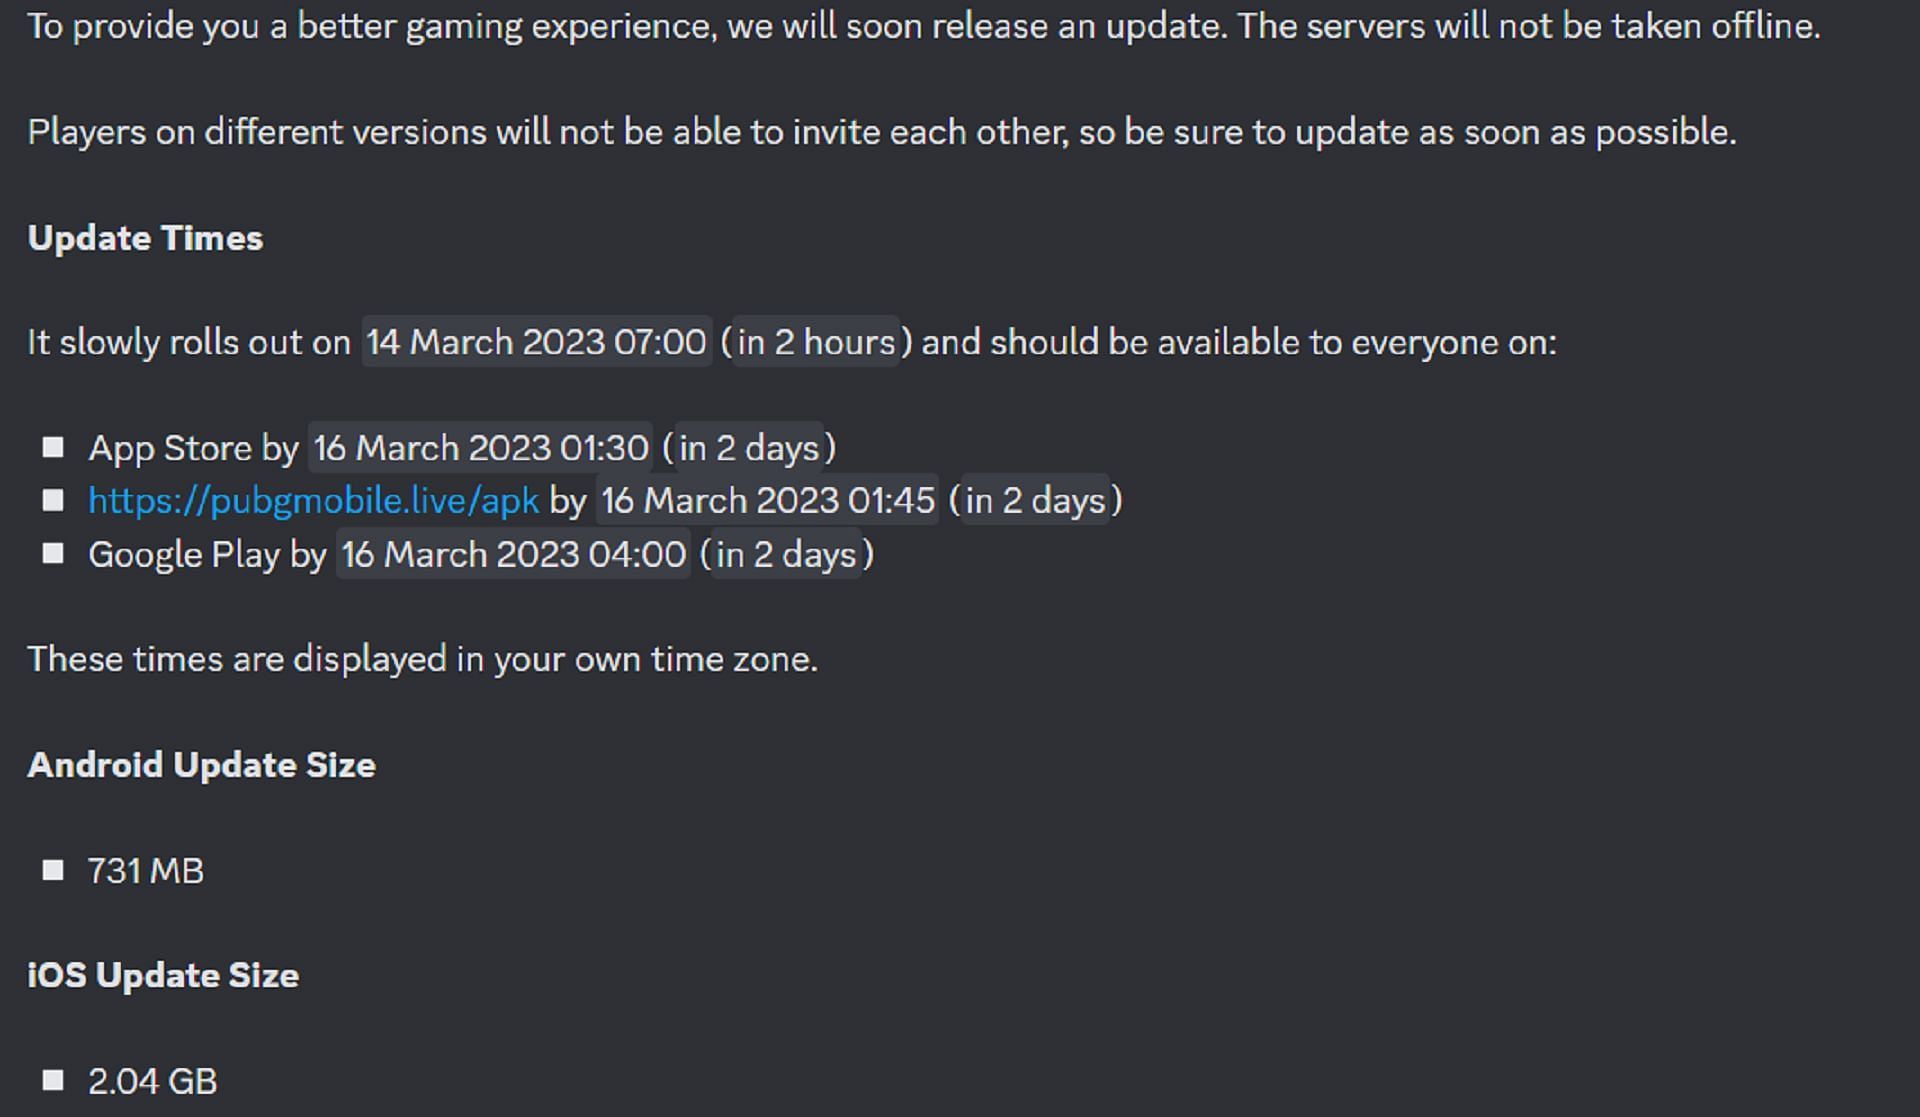 2.5 APK file will be available on the link by March 16 (Image via Official PUBG Mobile Discord Server)